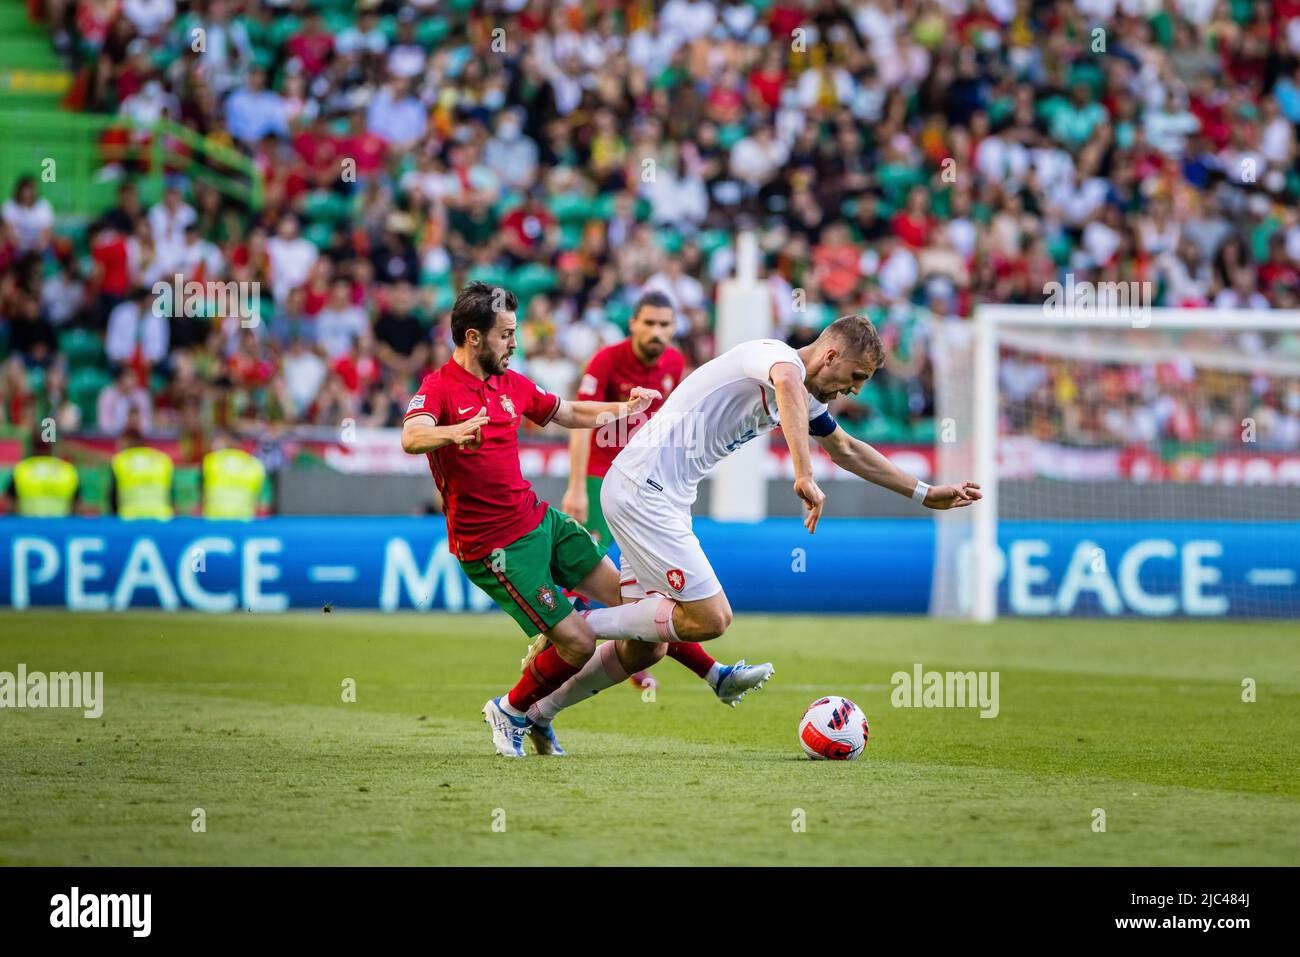 Lisbon, Portugal. 09th June, 2022. Bernardo Silva of Portugal (L) and Tomas Soucek of Czech Republic (R) seen in action during the UEFA Nations League, League A group 2 match between Portugal and Czech Republic at the Jose Alvalade stadium. (Final score; Portugal 2:0 Czech Republic) Credit: SOPA Images Limited/Alamy Live News Stock Photo